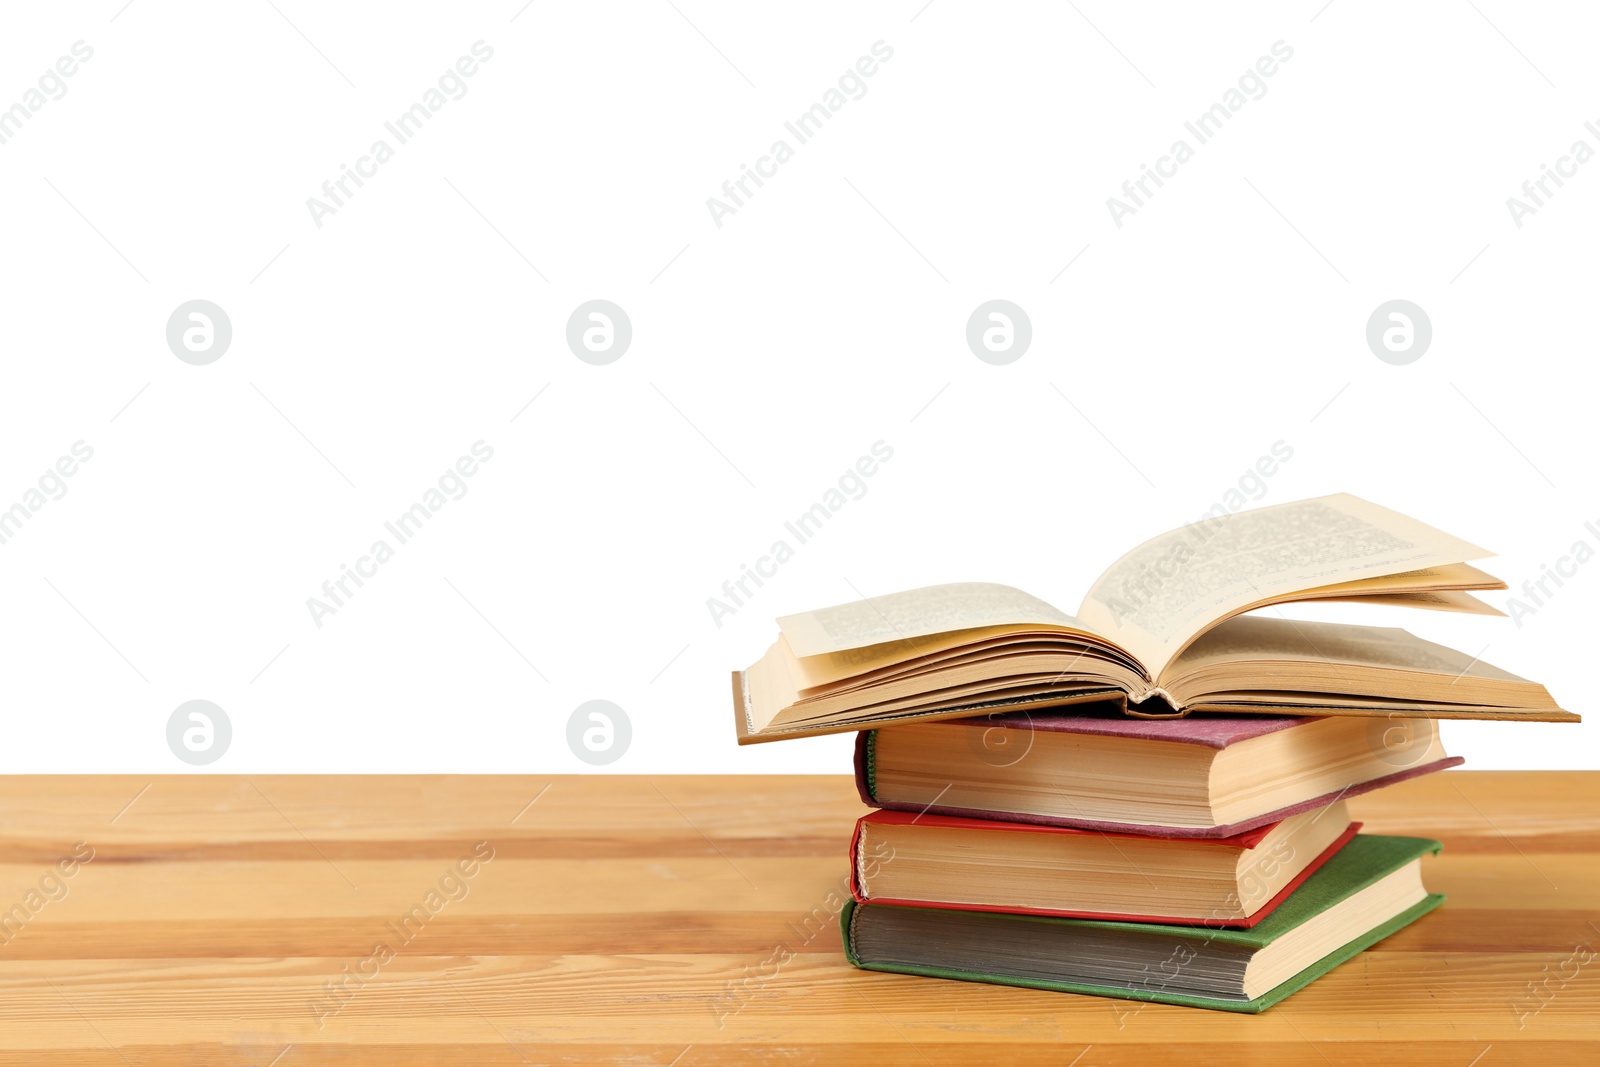 Photo of Stack of books on wooden table against white background. Library material